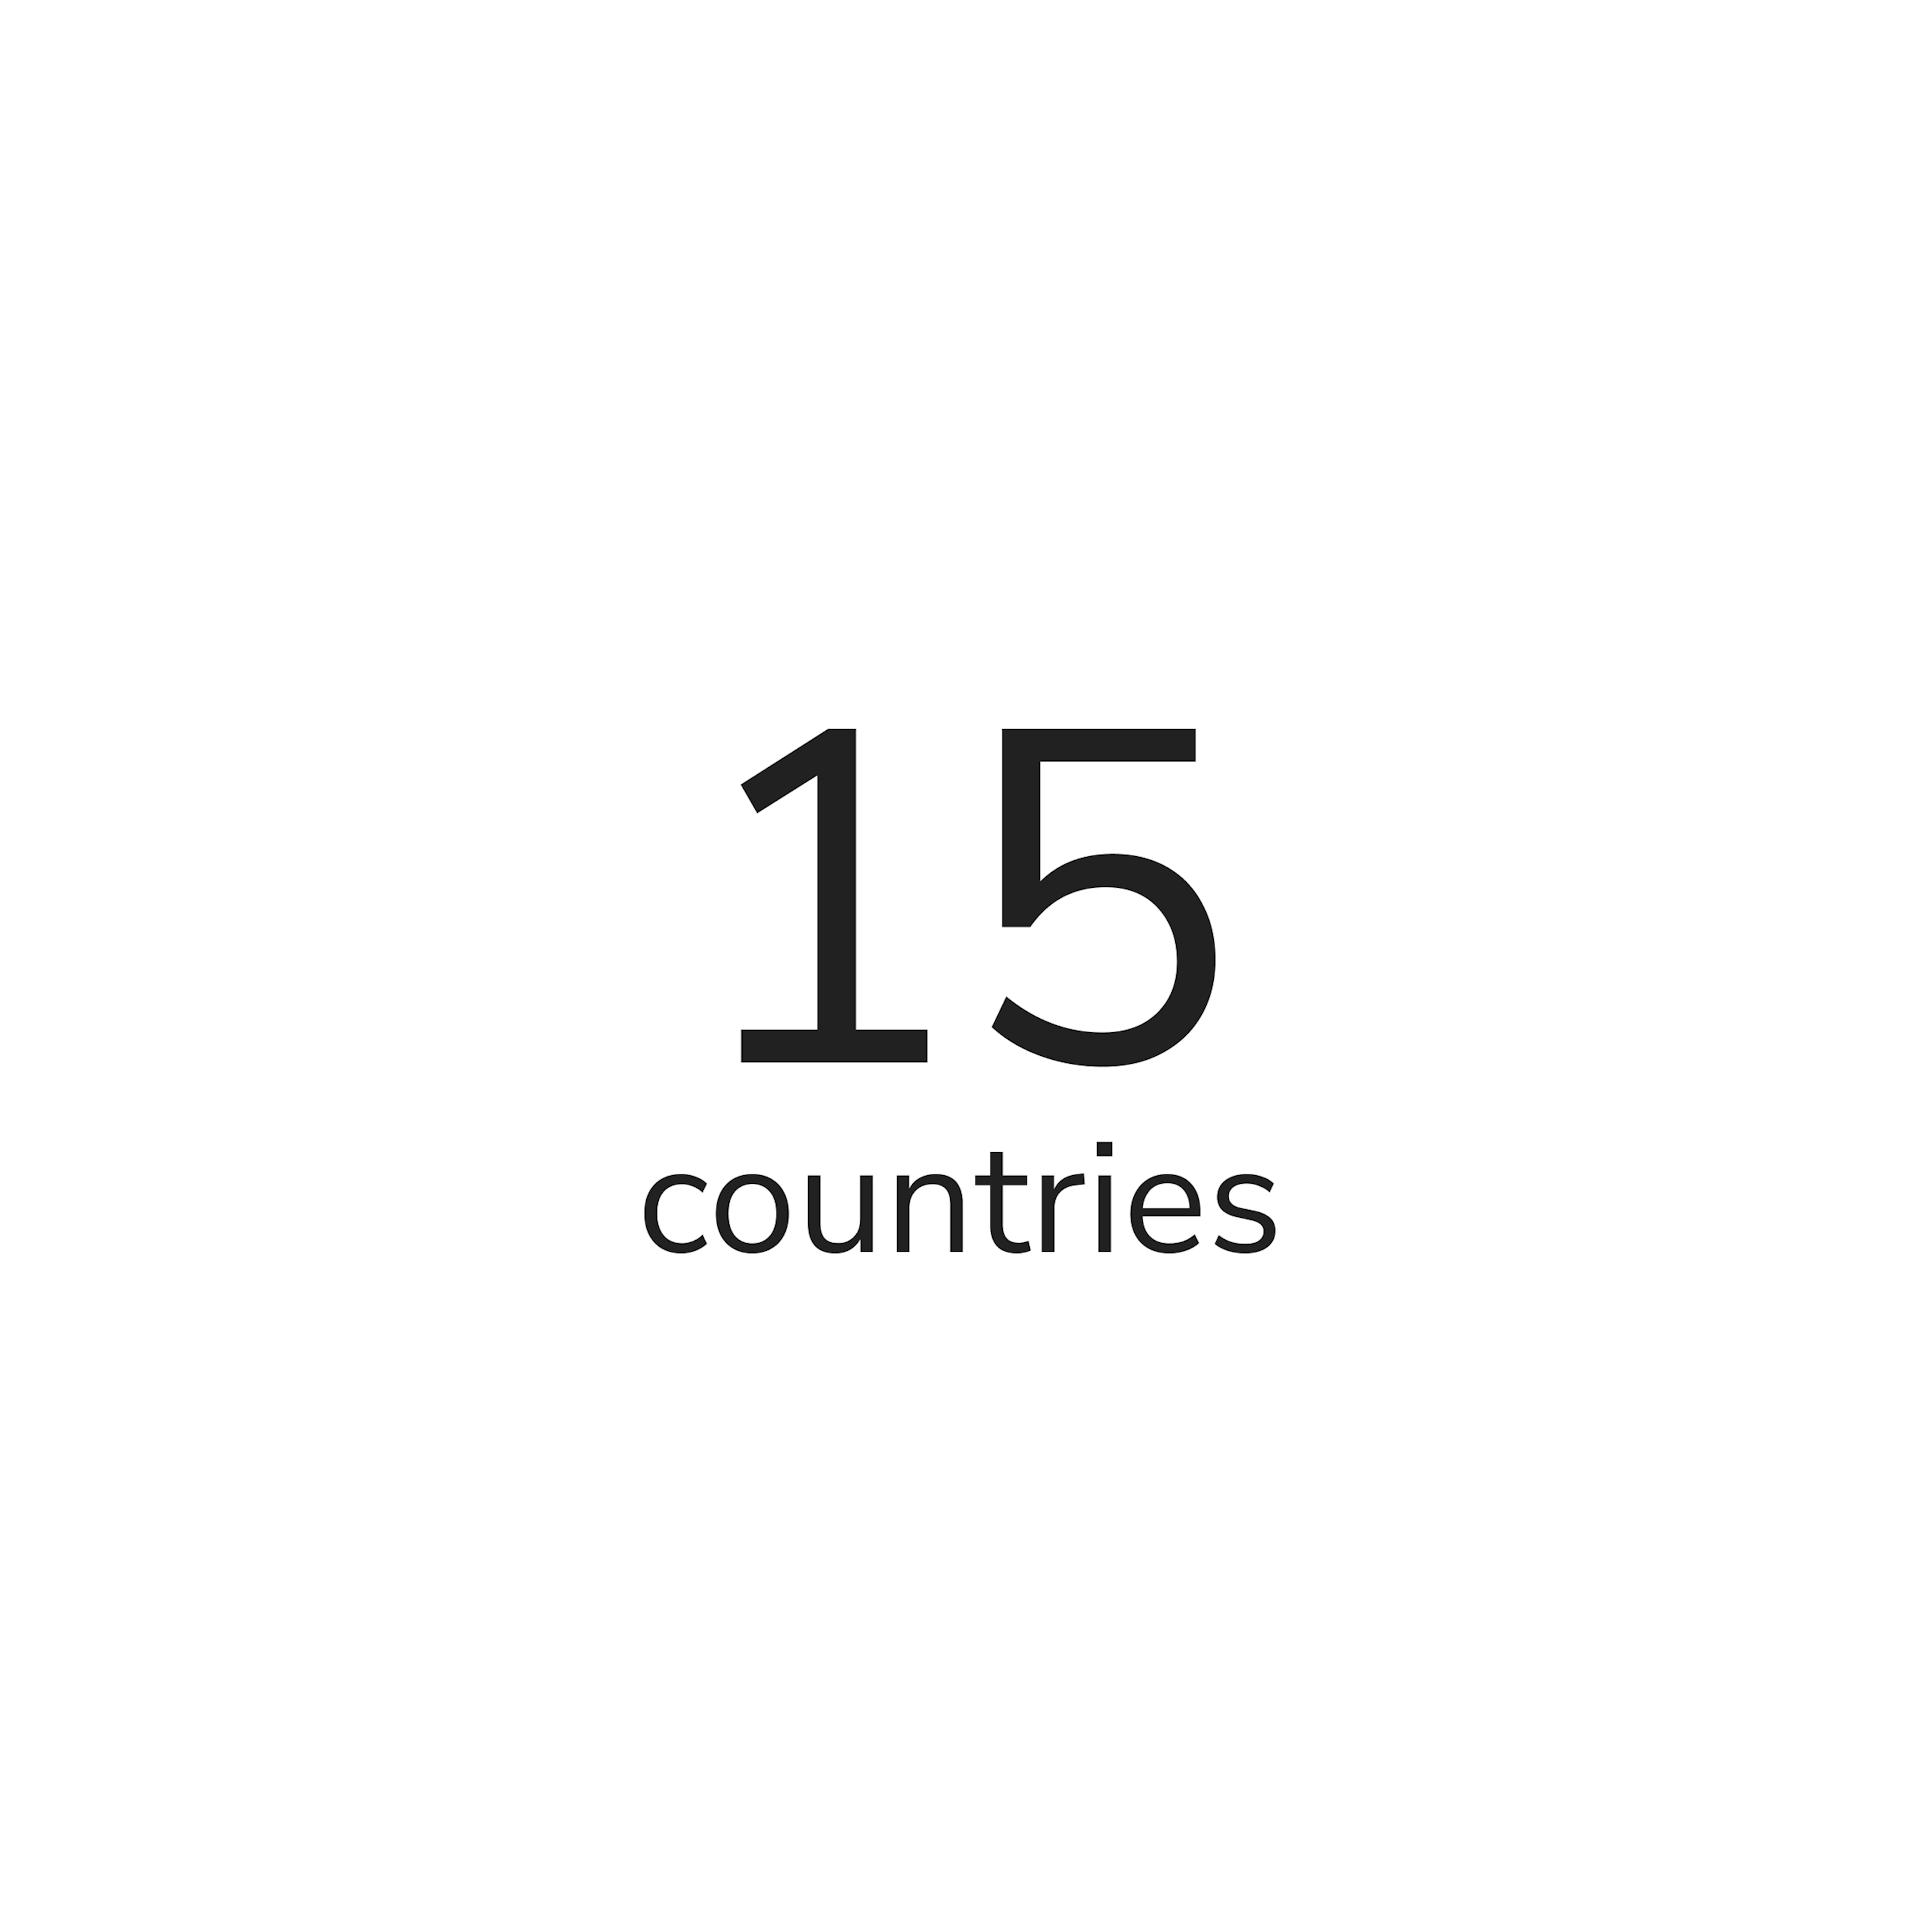 black text reading "15 countries" on a white background